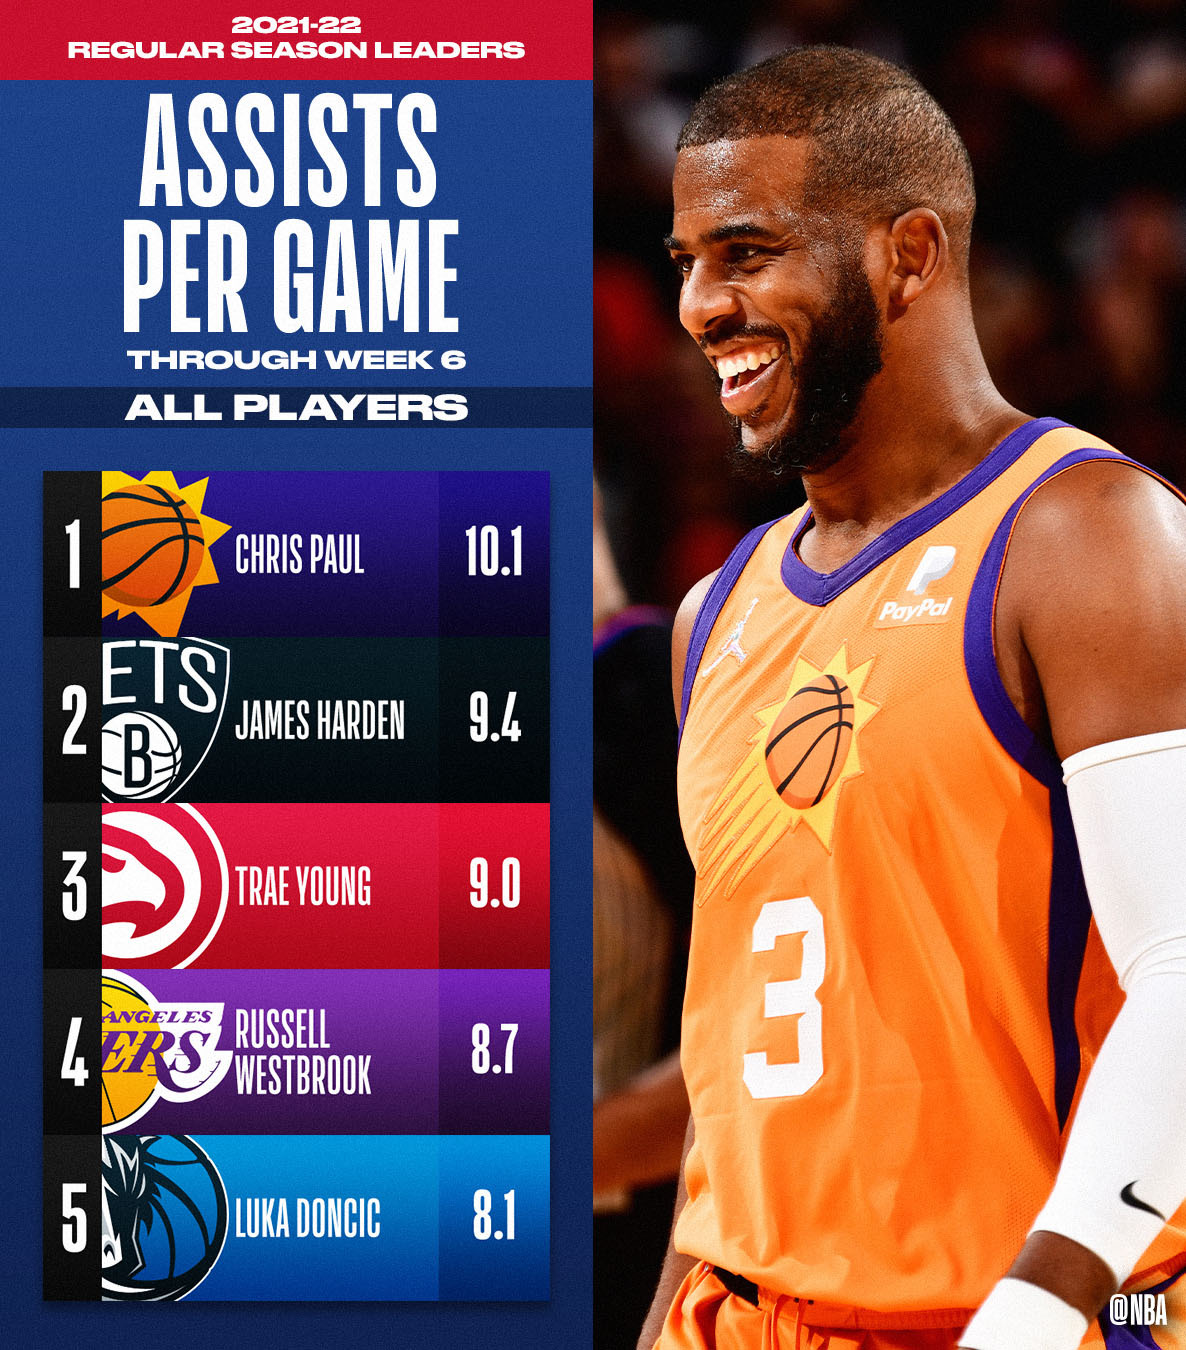 NBA.com/Stats on Twitter: "The TOTAL ASSISTS and ASSISTS PER GAME leaders through Week 6 of the season. Full Leaderboard: https://t.co/92V8sAZ8h4 https://t.co/mKolddwYHz" / Twitter